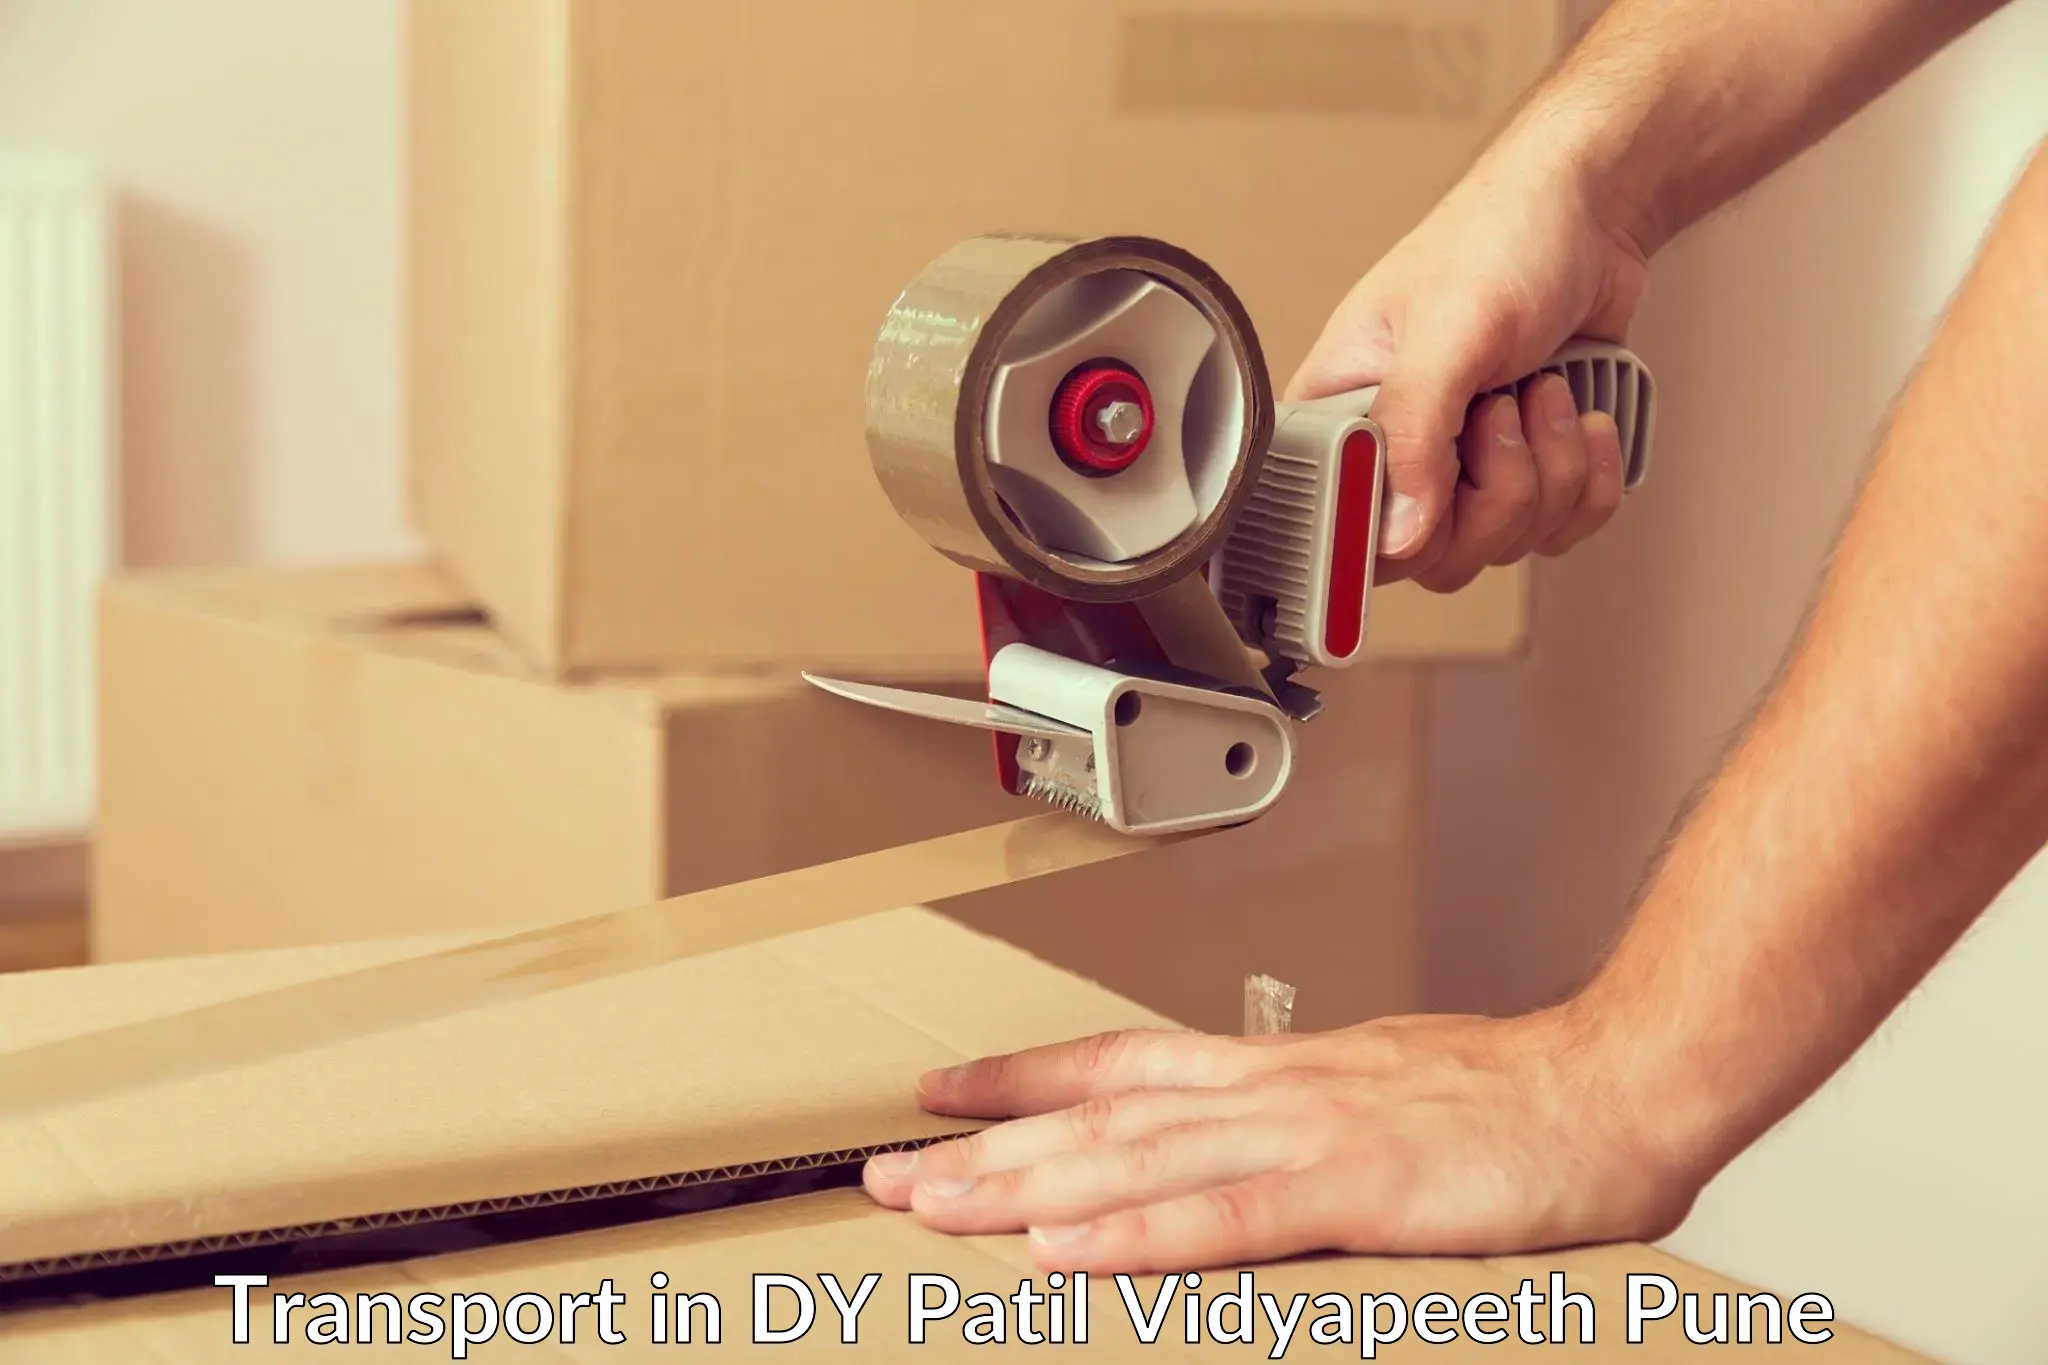 Air freight transport services in DY Patil Vidyapeeth Pune